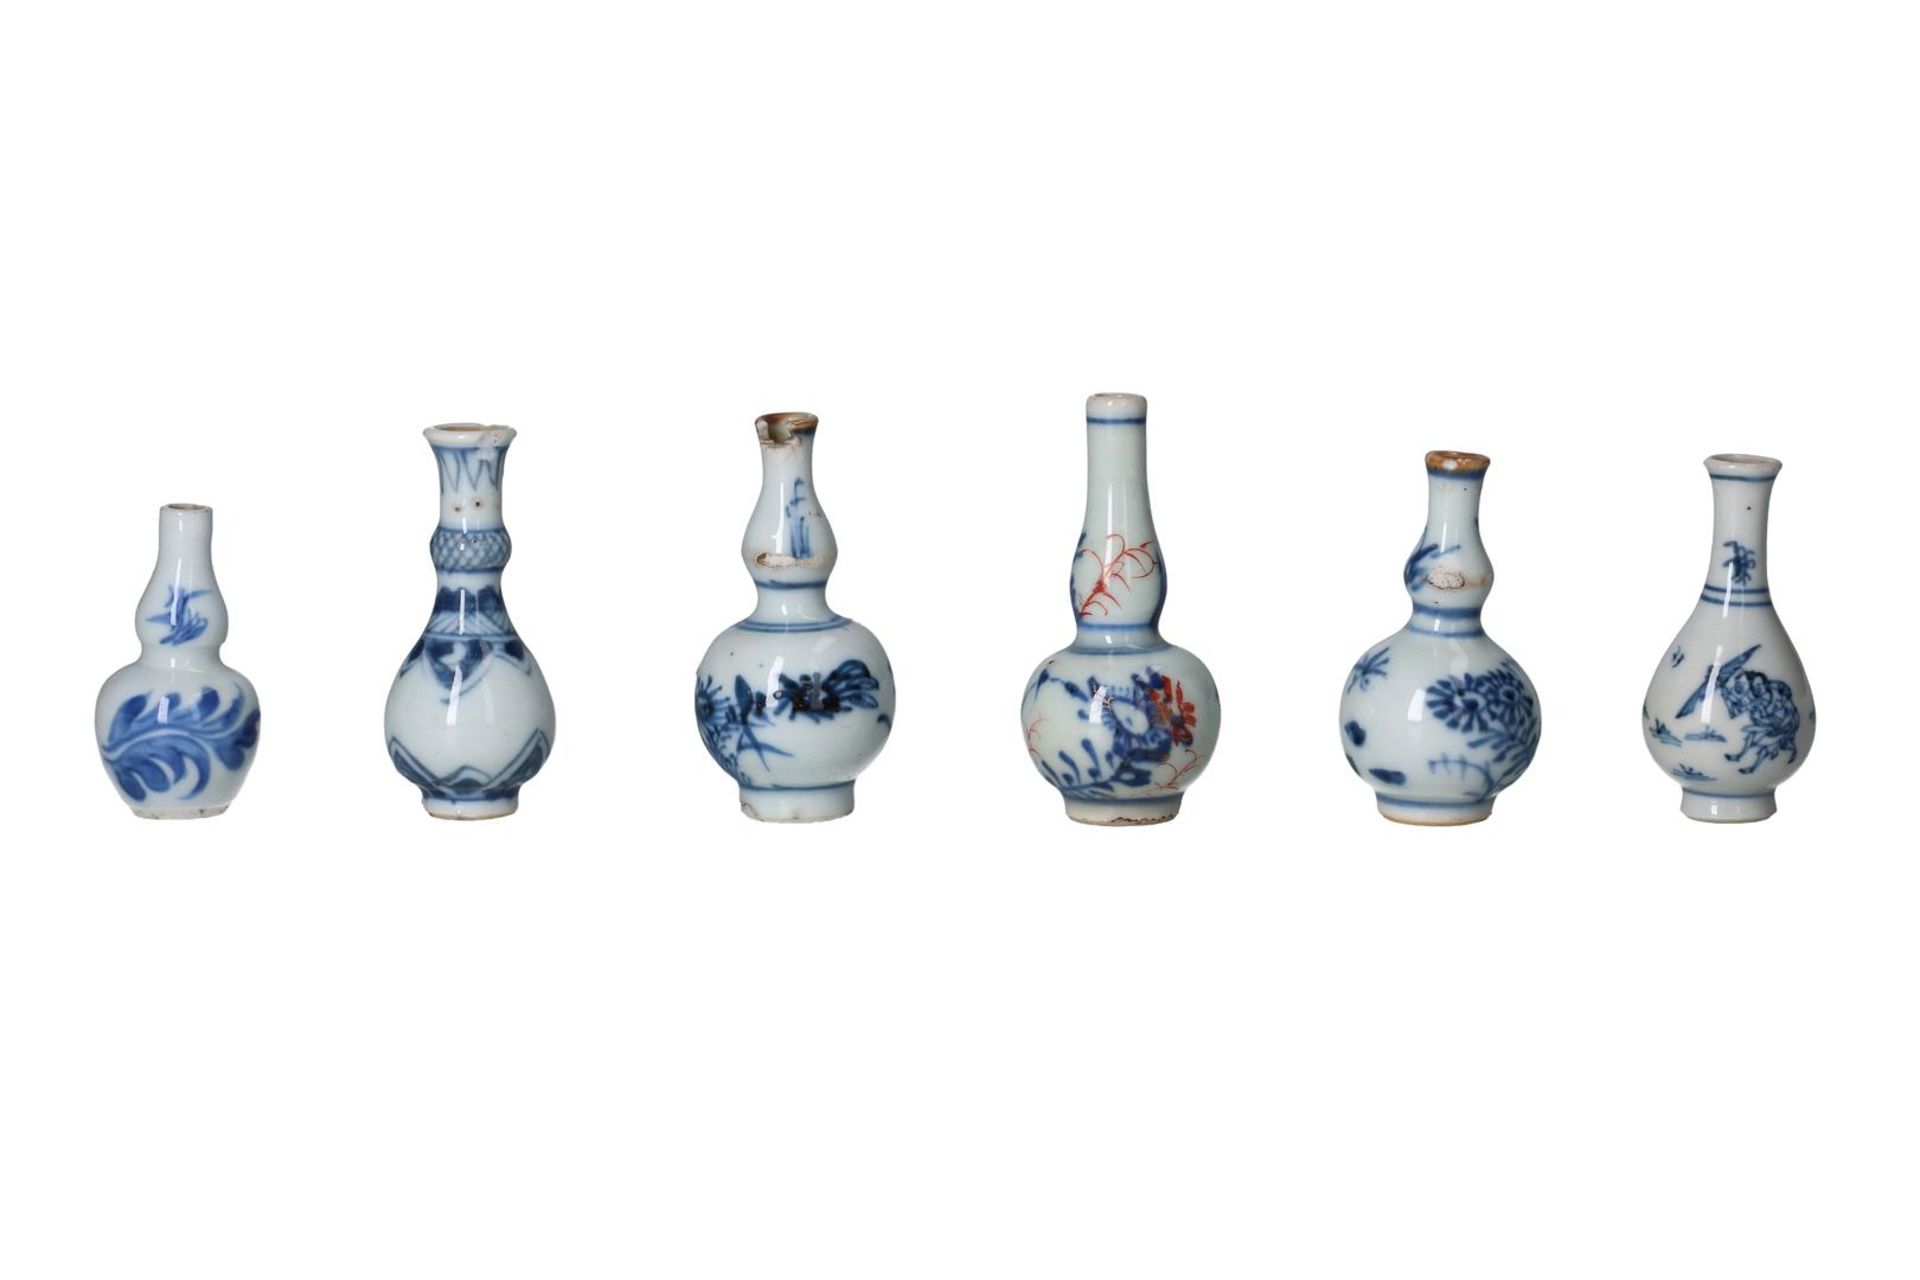 Lot of twelve blue and white Imari porcelain miniature vases, decorated with flowers. Unmarked. - Image 3 of 7